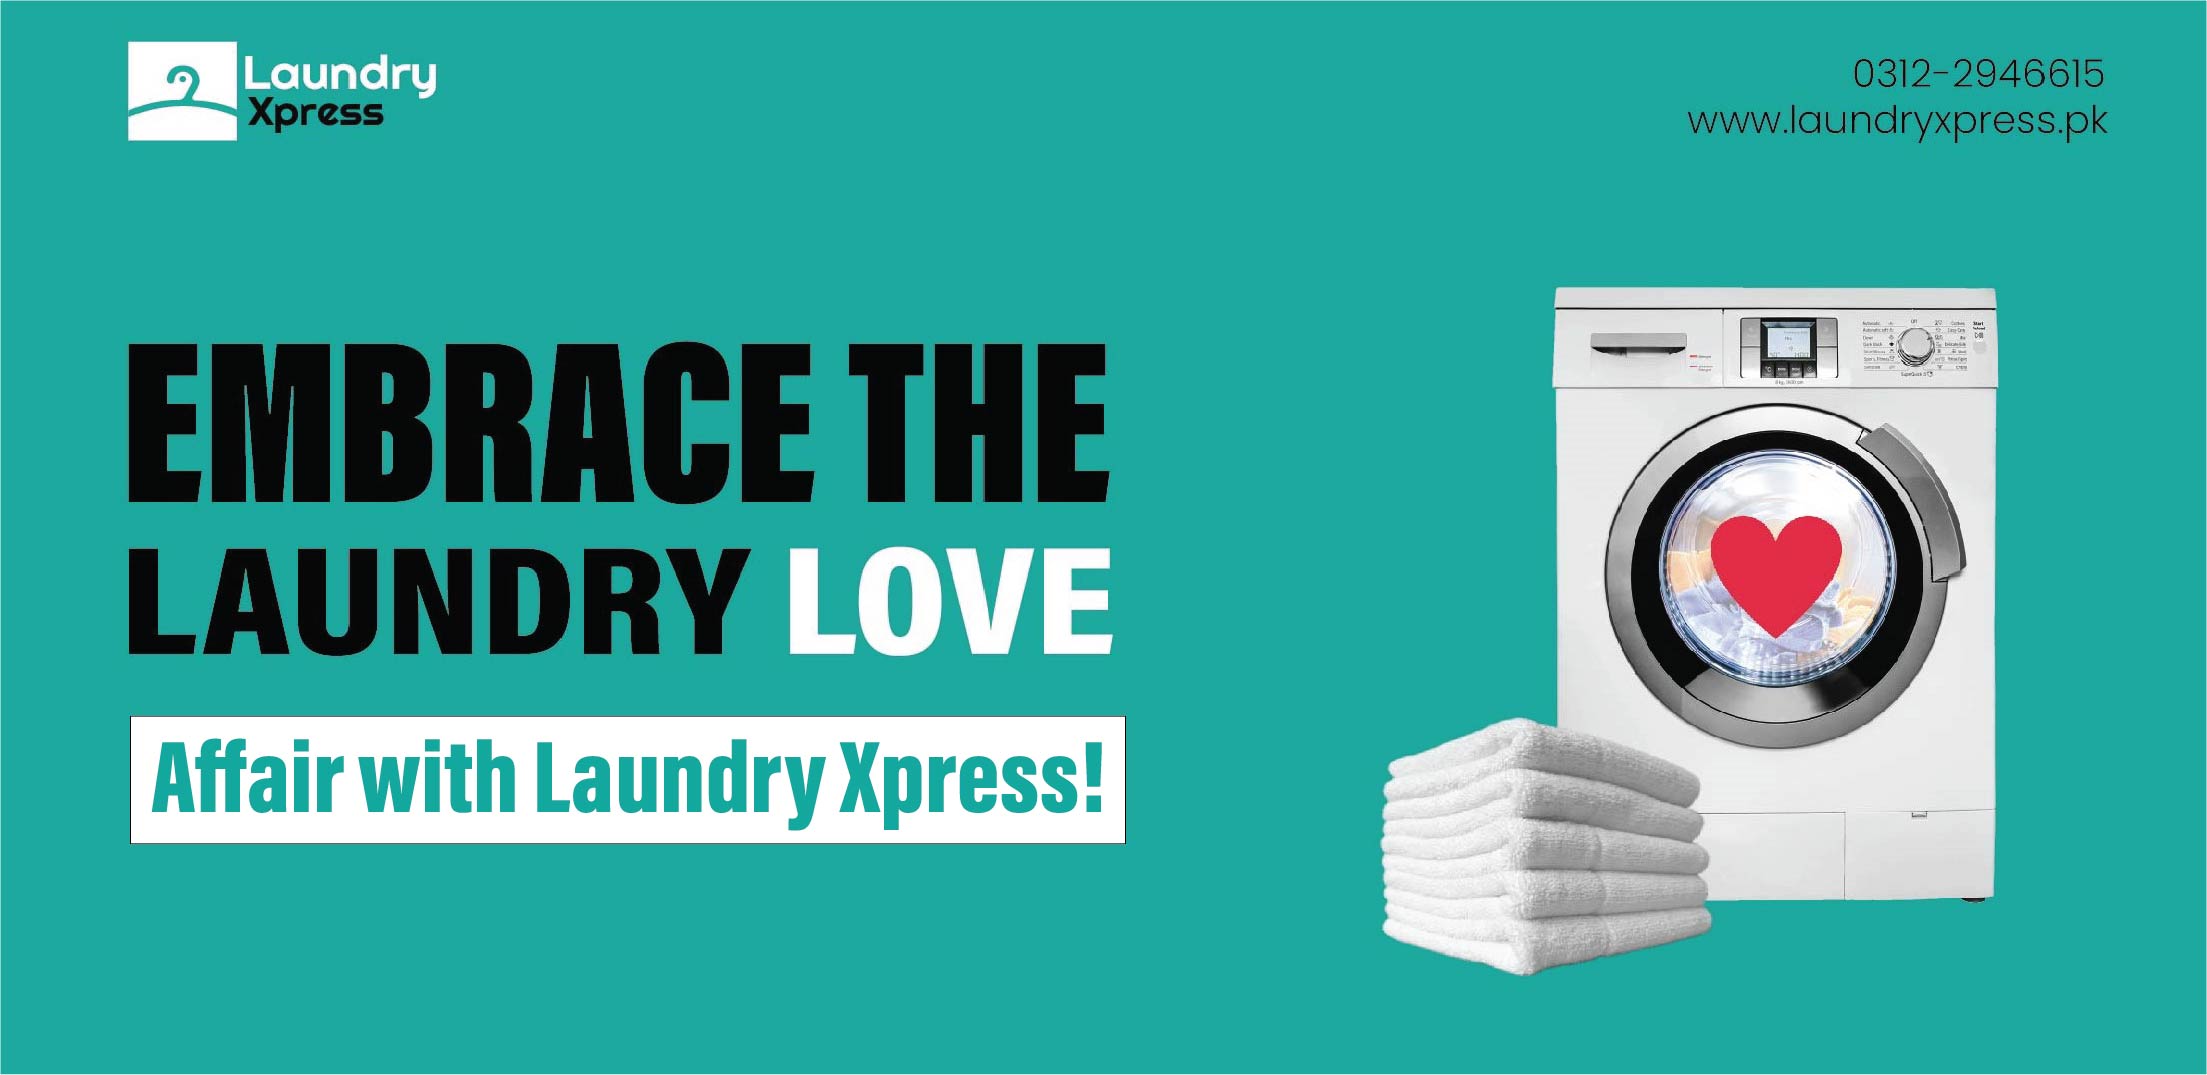 Embrace the Laundry Love affair with Laundry Xpress - Main Image